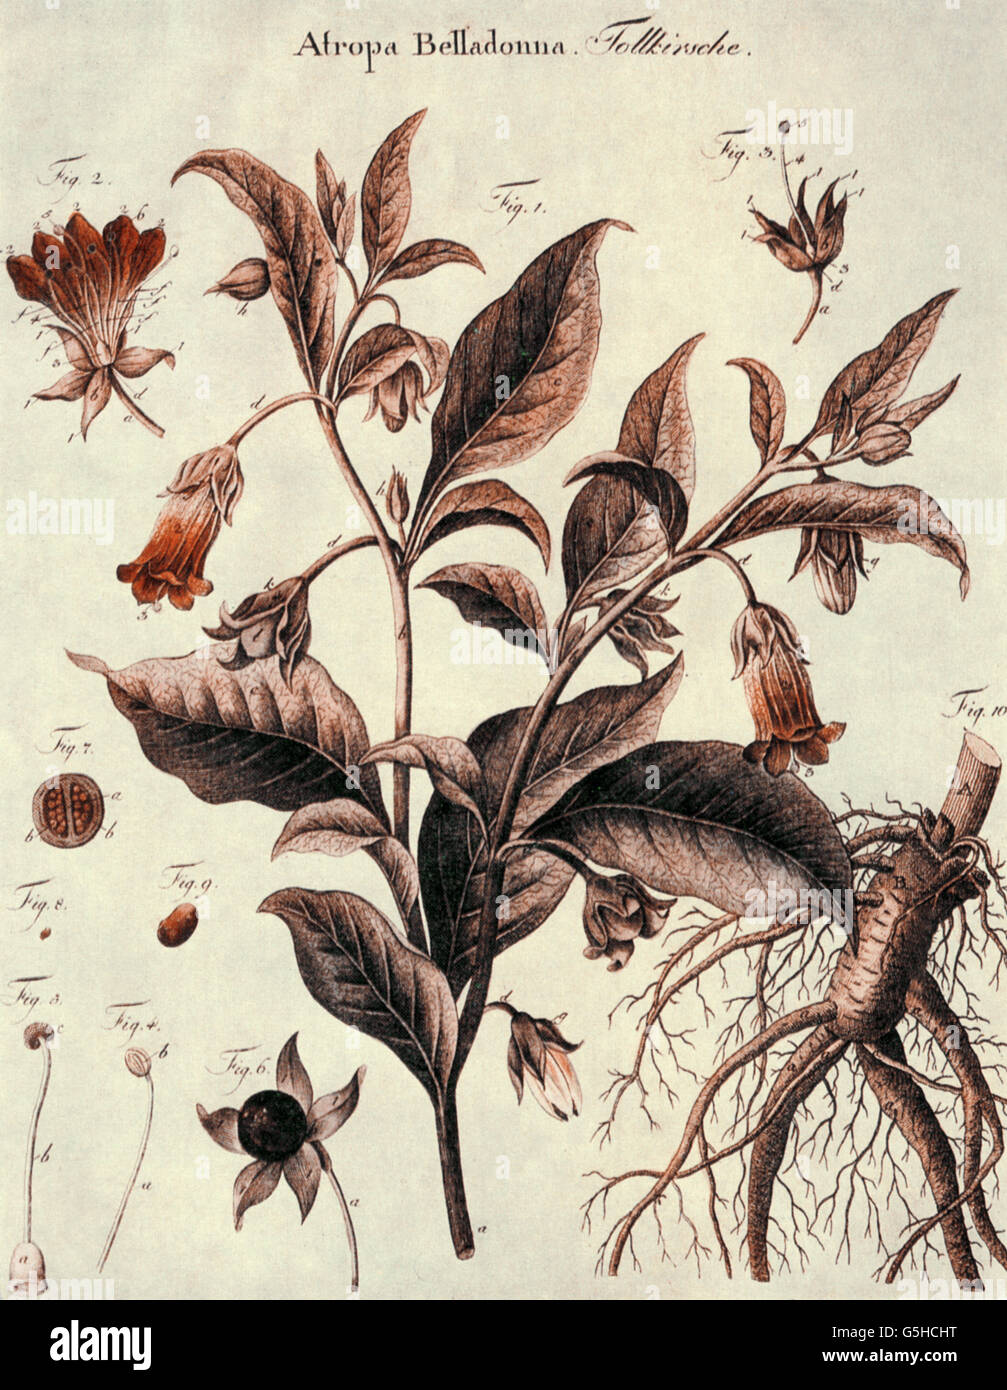 botany, black deadly nightshade (Atropa Belladonna), root, leaves, stalk, blossom, illustration from a herbal, 18th/19th century, plant of the Solanaceae family, plant of the nightshade family, Solanaceae, poison, toxic, alkaloids, Hyoscamine, atropine, scopolamine, ingredient of magic salve, poisonous plant, plants, Solanaceae, historic, historical, Additional-Rights-Clearences-Not Available Stock Photo